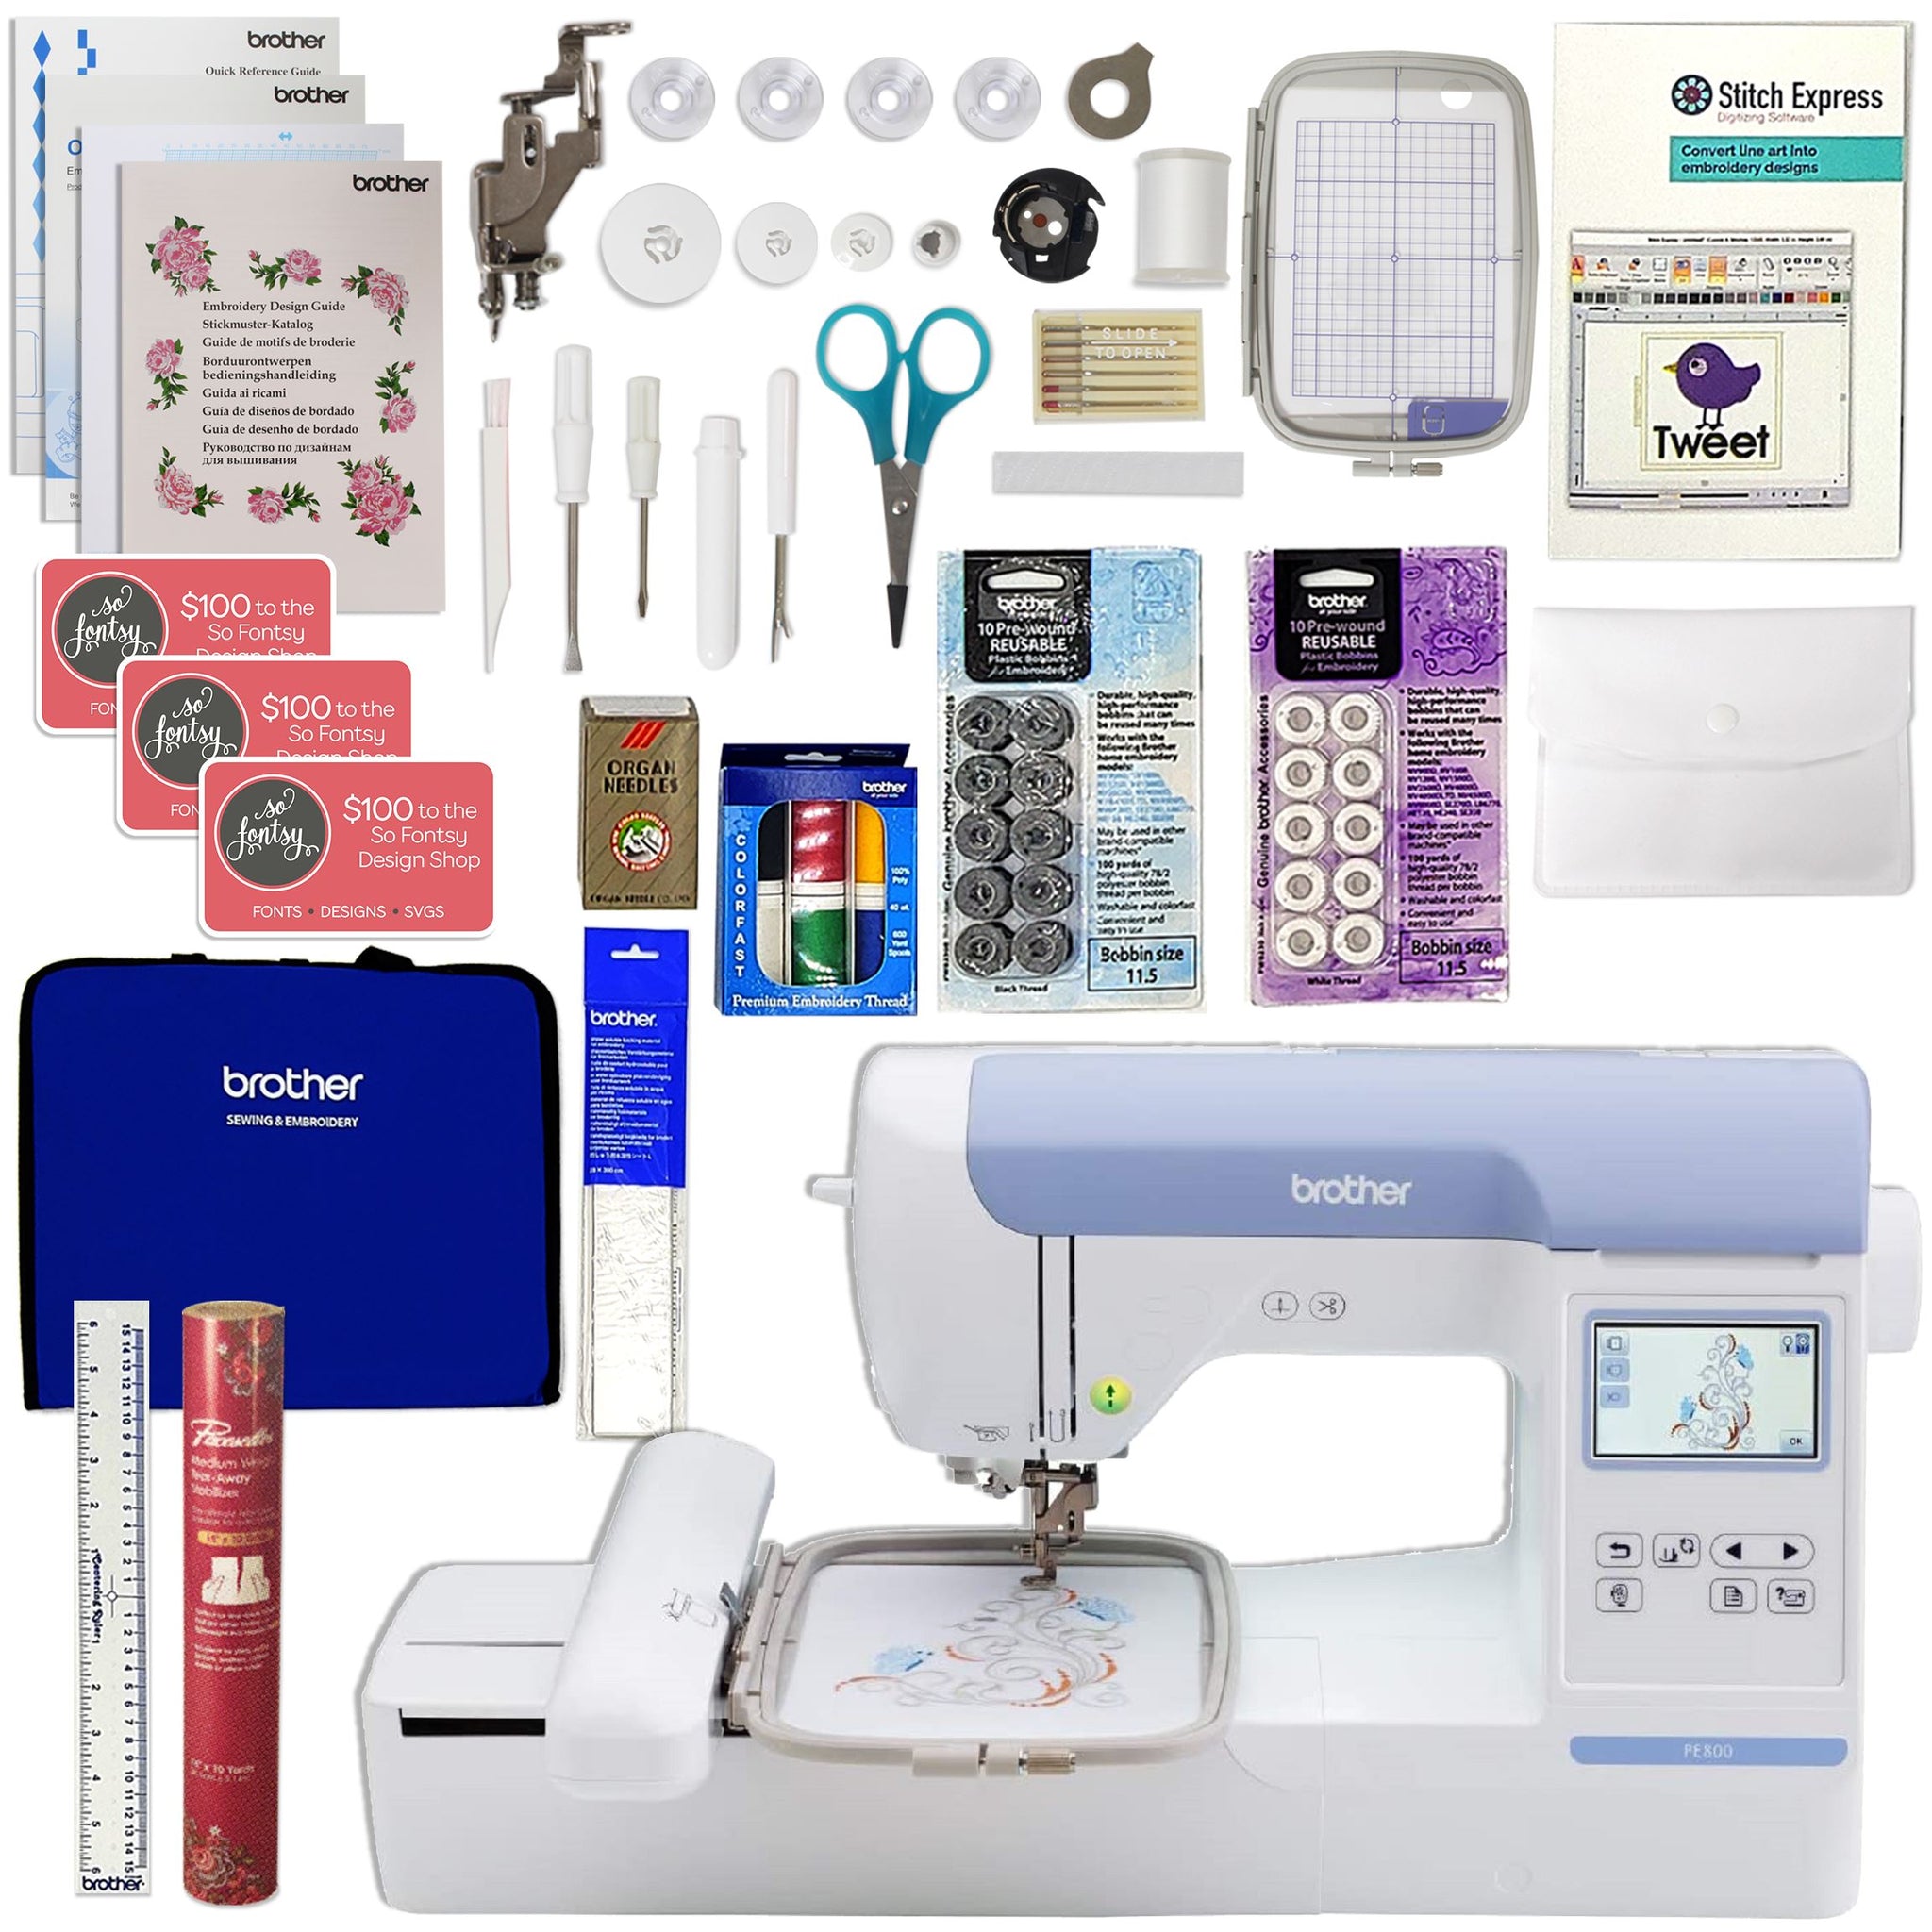 Brother SE2000 5 x 7 Embroidery & Sewing Machine w/ $1499 Sewing Bundle